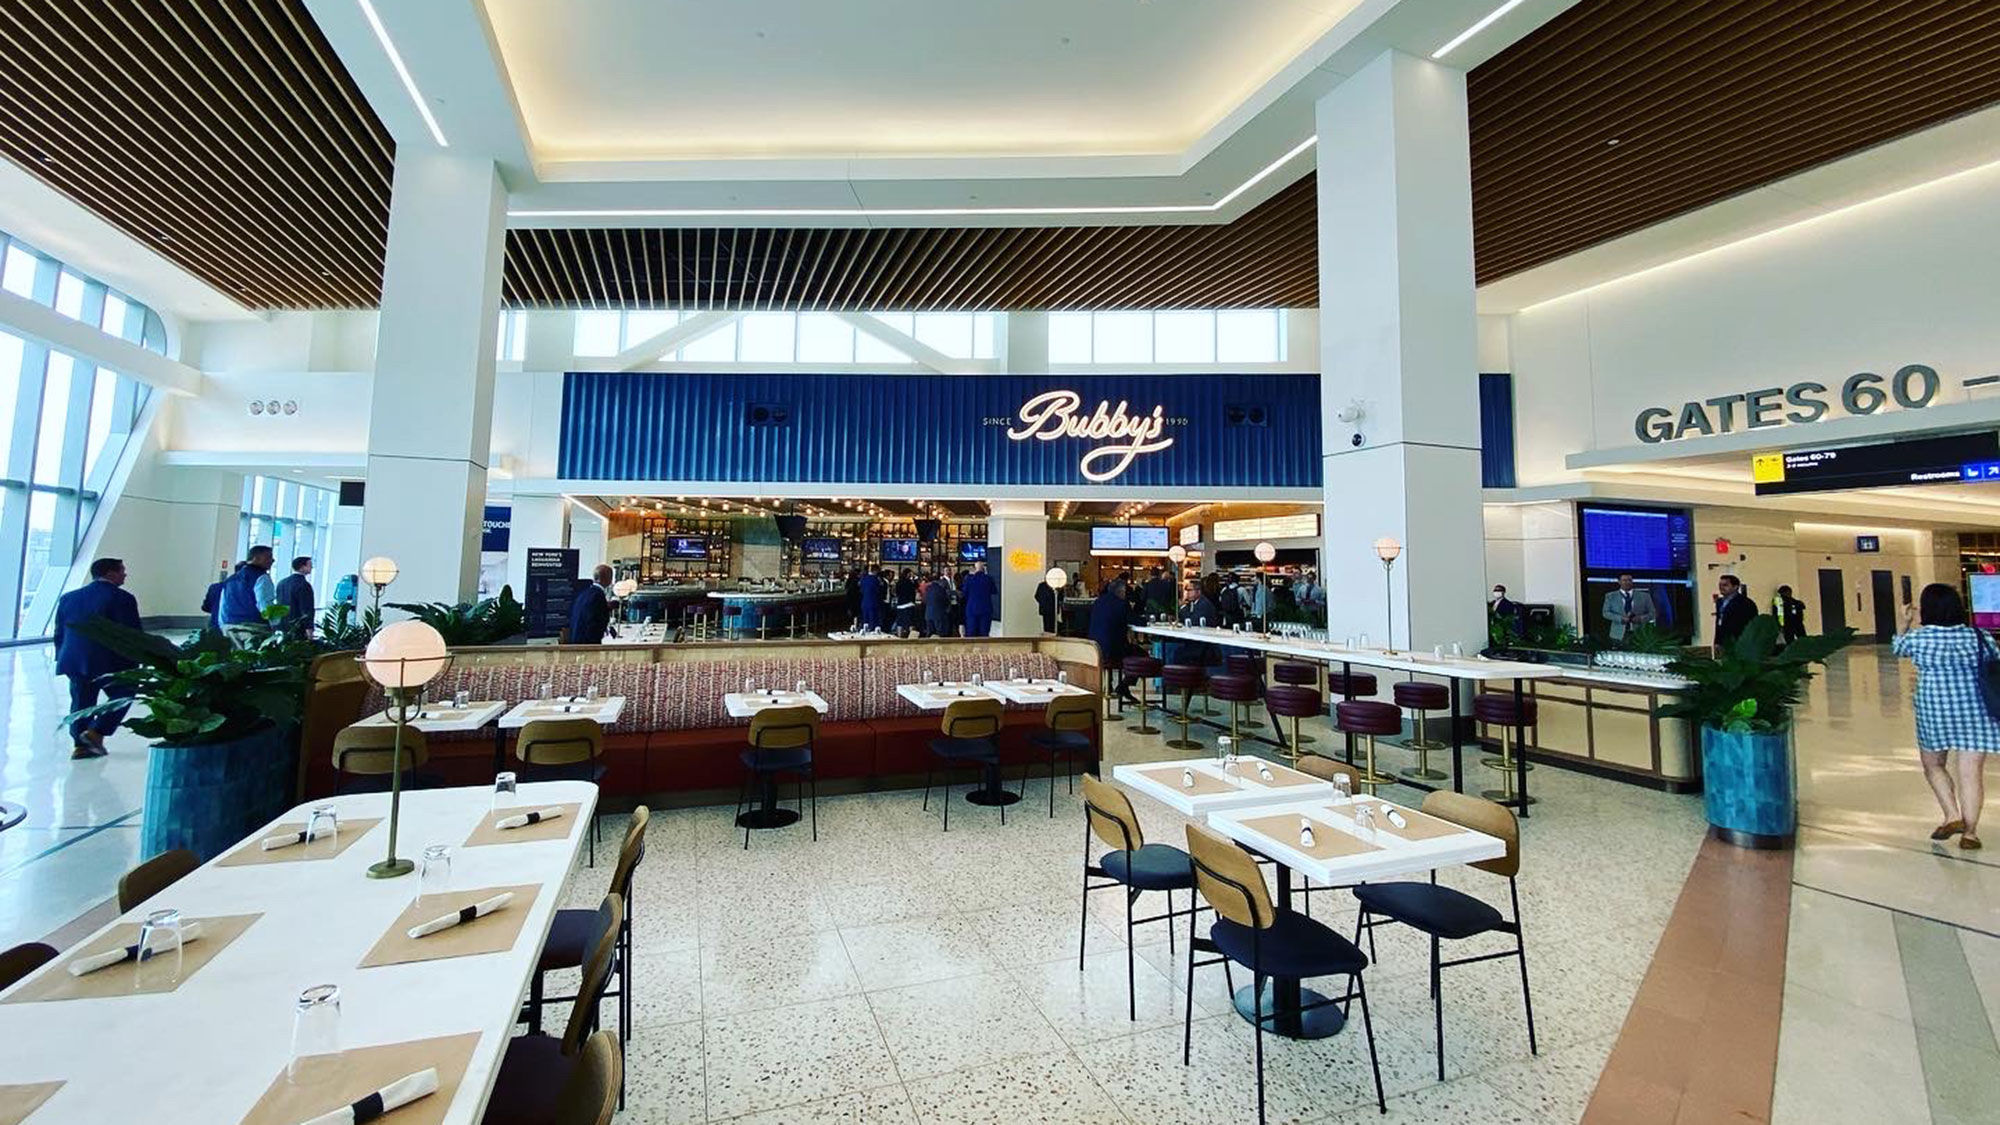 Bubby's is one of the restaurants that will open in the new LaGuardia Terminal C.